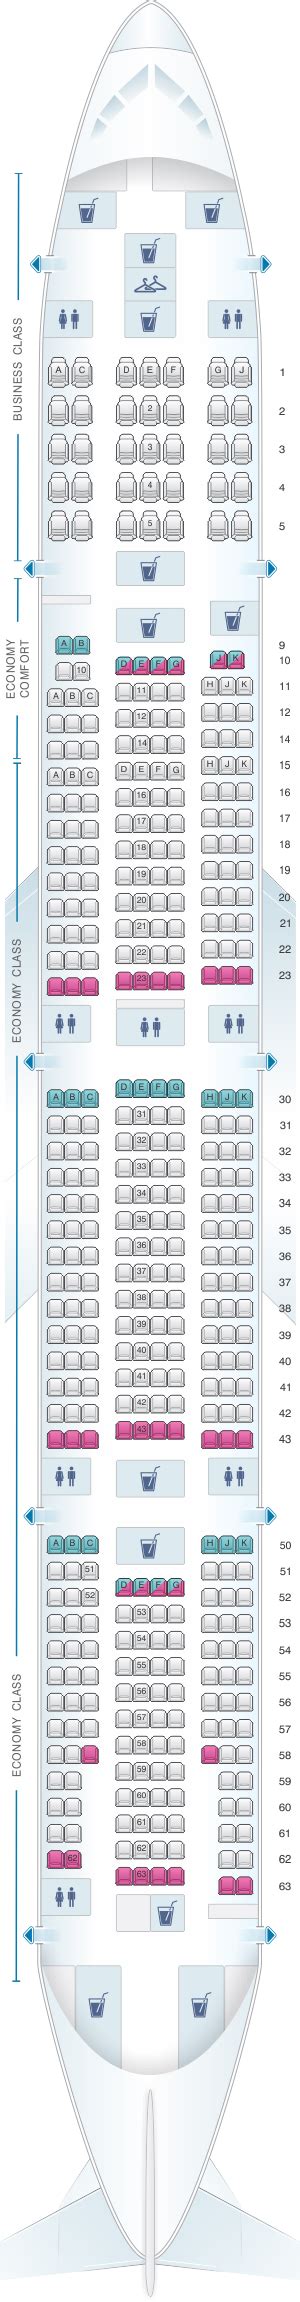 Seat map klm boeing 777 300er. For your next KLM flight, use this seating chart to get the most comfortable seats, legroom, and recline on . ... KLM Seat Maps. Airbus A330-300 (333) Overview; Planes ... Boeing 737-800 (738) Boeing 737-900 (739) Boeing 777-200ER (772) Boeing 777-300ER (77W) Boeing 787-10 (781) Boeing 787-9 (789) Embraer E-175; Embraer E-190; Check-in; … 